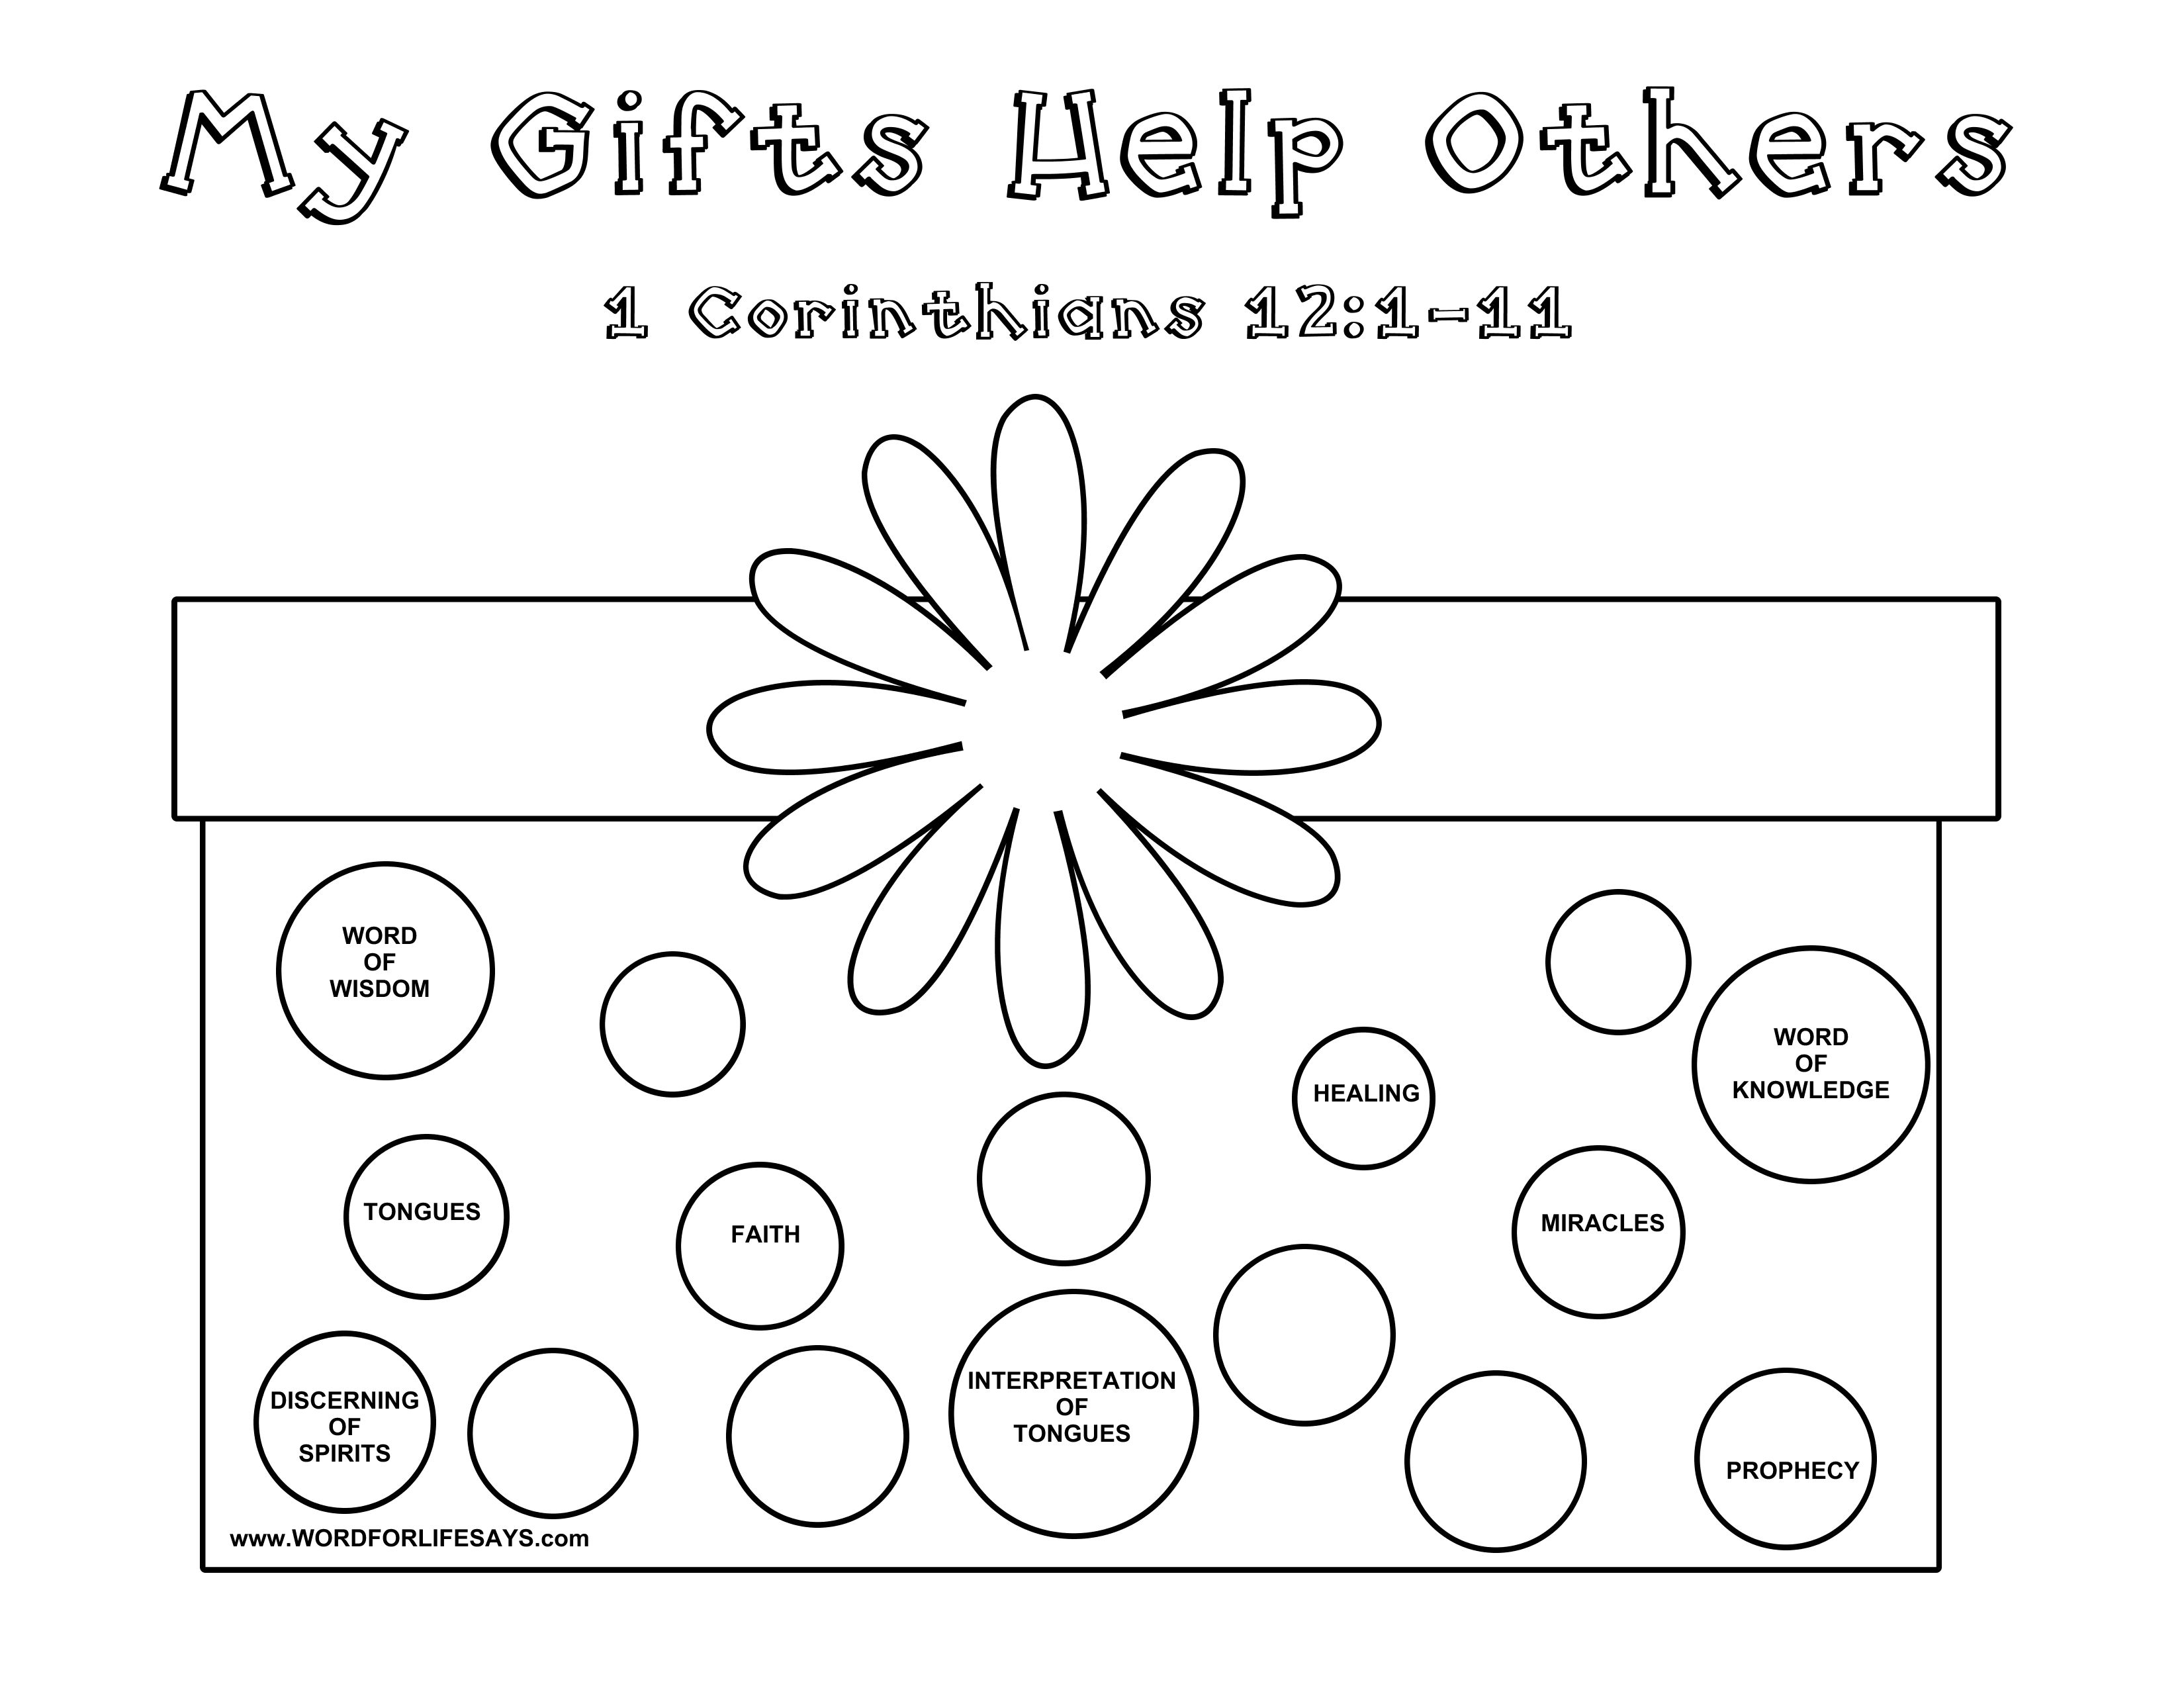 Gifts of the Spirit Coloring Sheet 001